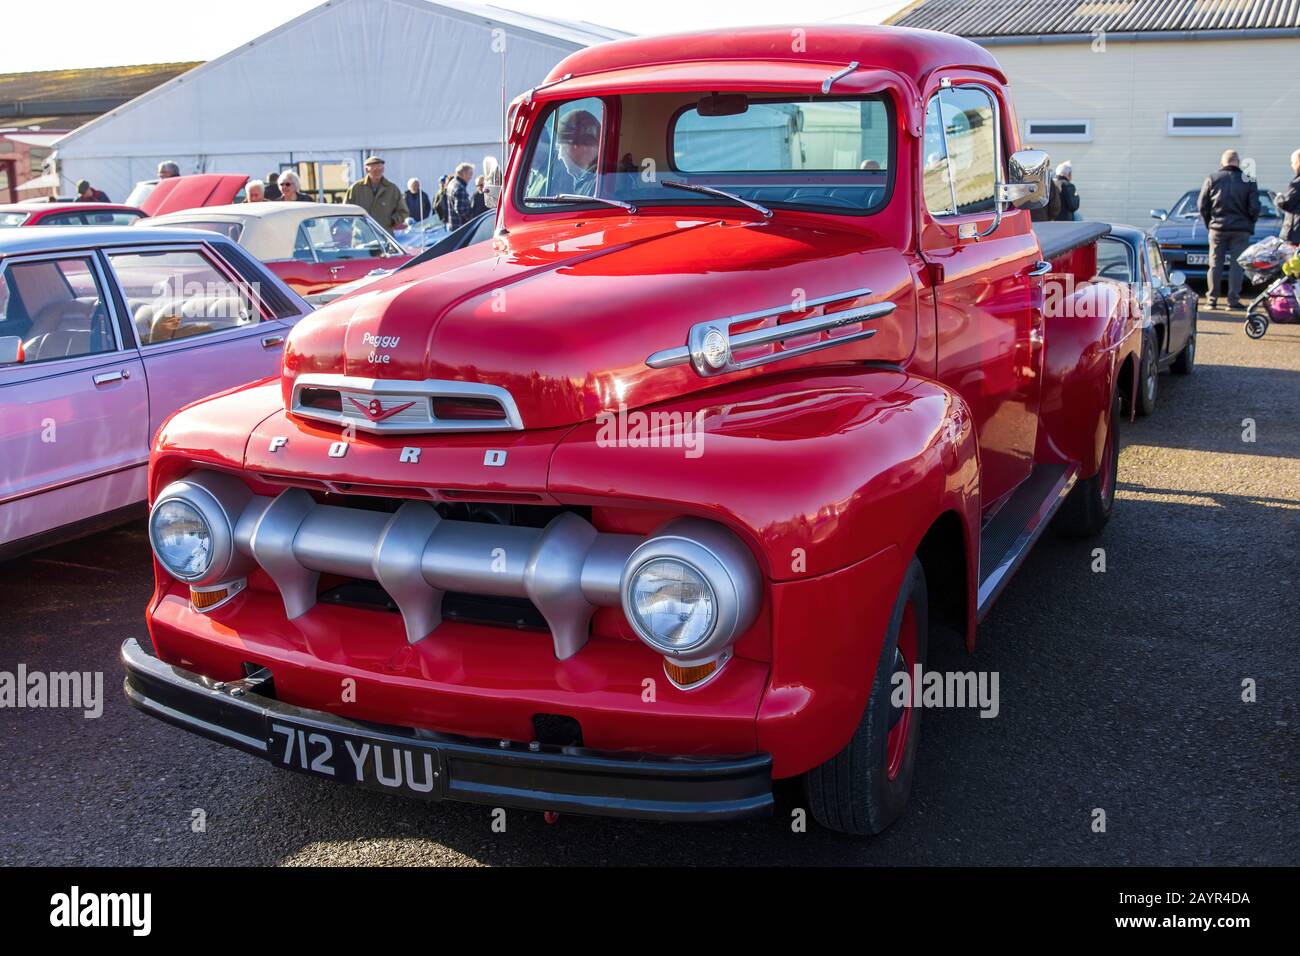 Ford F1 V8 Pick Up Deluxe, 1952, Reg No: 712 YUU, at The Great Western Classic Car Show, Shepton Mallet UK, Febuary 08, 2020 Stock Photo